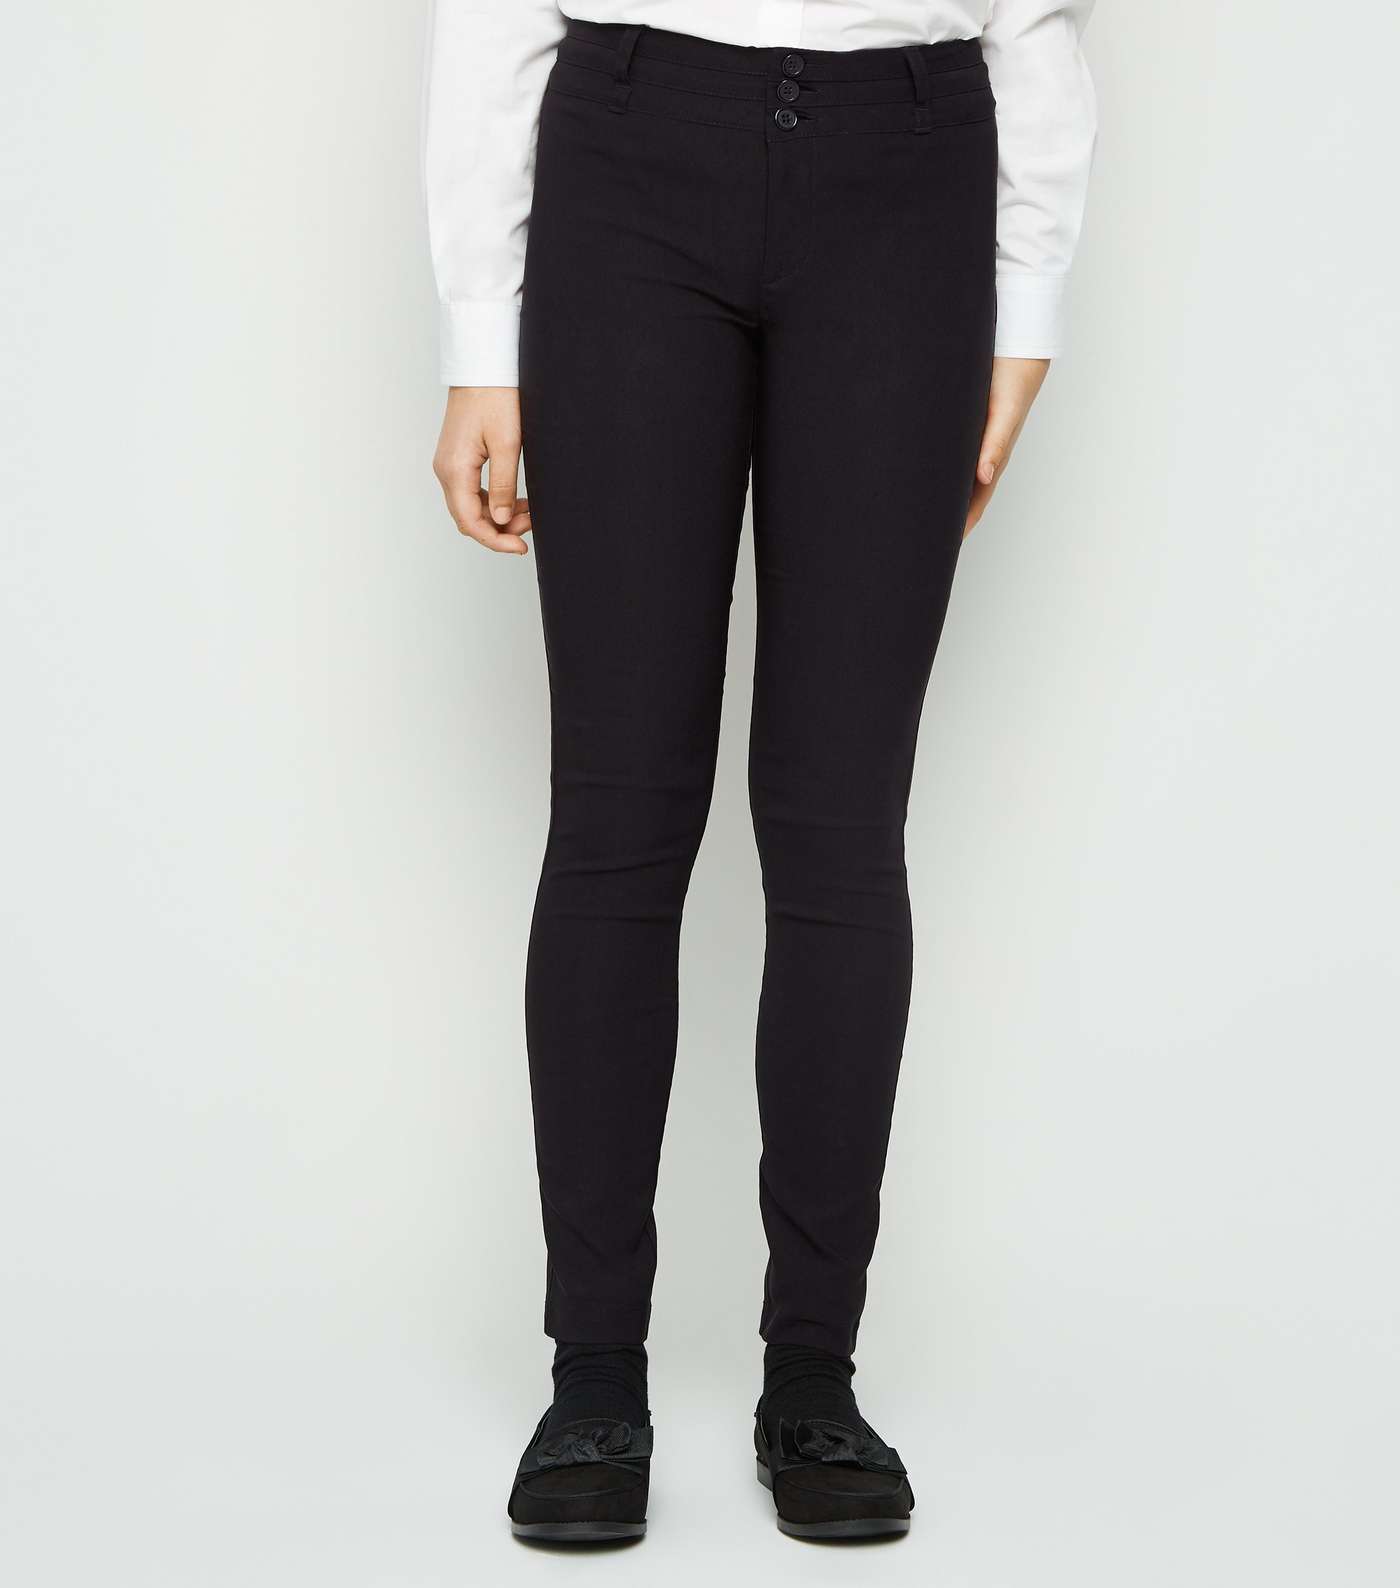 Girls Black 3 Button Super Skinny Trousers Image 2